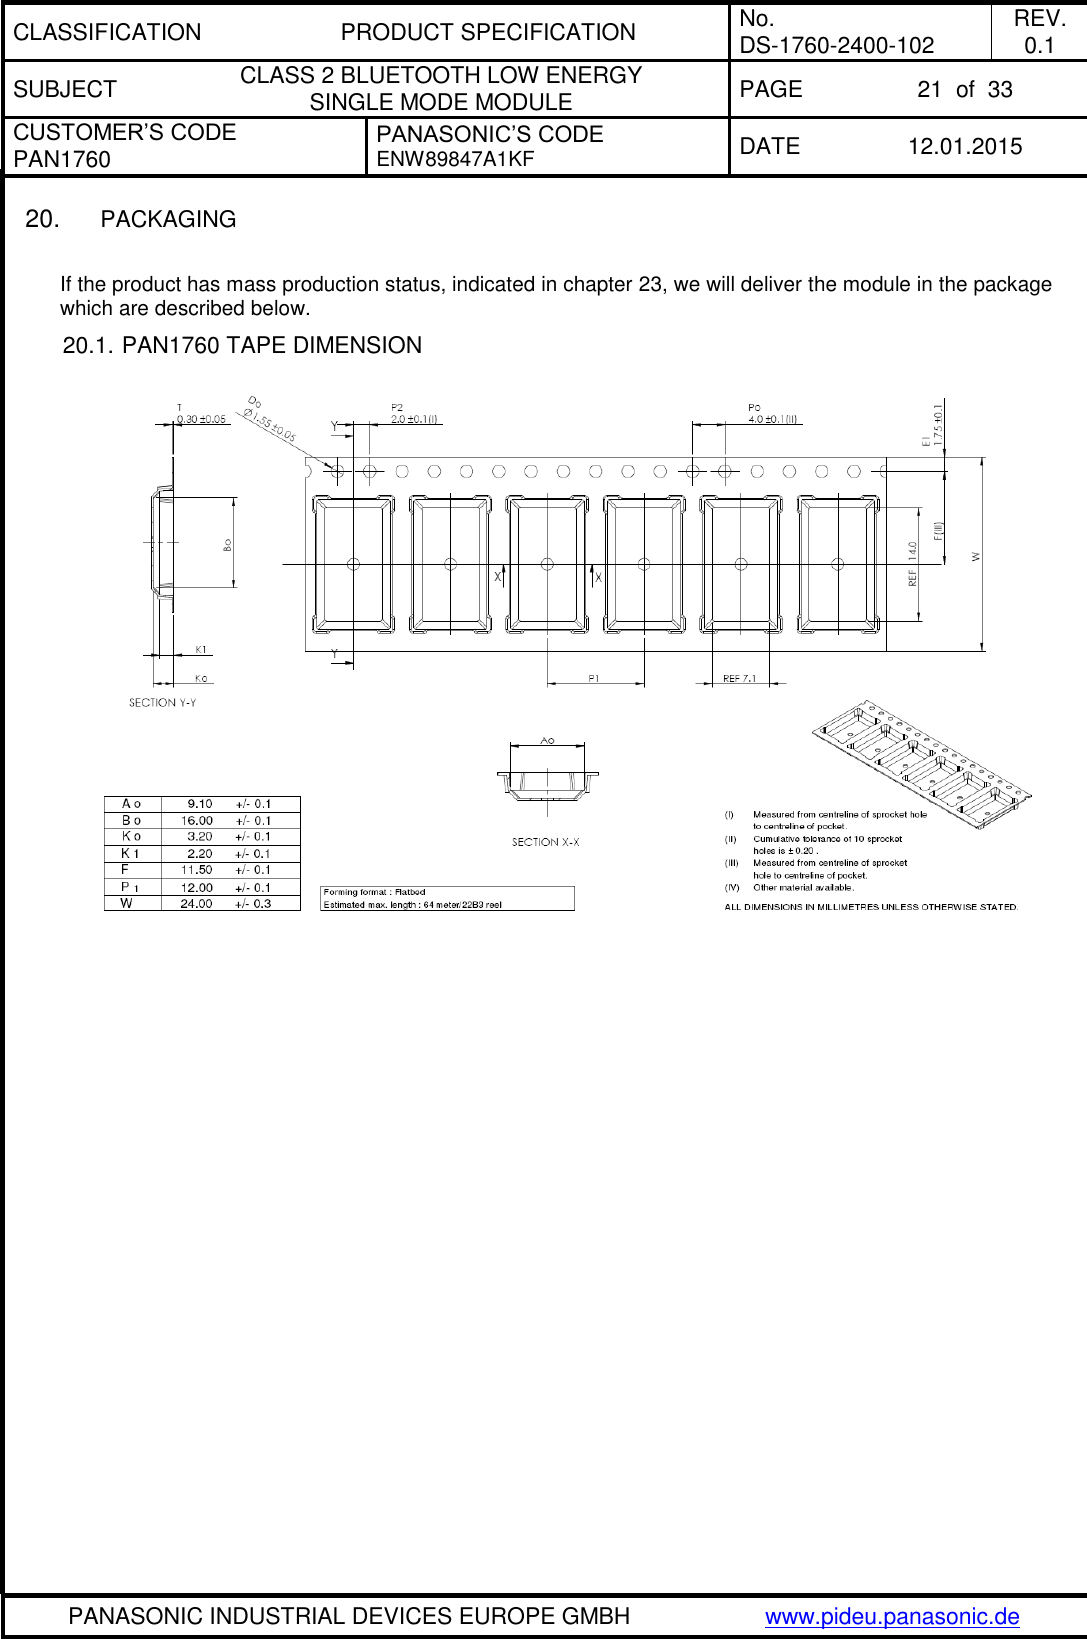 CLASSIFICATION PRODUCT SPECIFICATION No. DS-1760-2400-102 REV. 0.1 SUBJECT CLASS 2 BLUETOOTH LOW ENERGY  SINGLE MODE MODULE PAGE 21  of  33 CUSTOMER’S CODE PAN1760 PANASONIC’S CODE ENW89847A1KF  DATE 12.01.2015   PANASONIC INDUSTRIAL DEVICES EUROPE GMBH www.pideu.panasonic.de  20. PACKAGING  If the product has mass production status, indicated in chapter 23, we will deliver the module in the package which are described below. 20.1. PAN1760 TAPE DIMENSION     